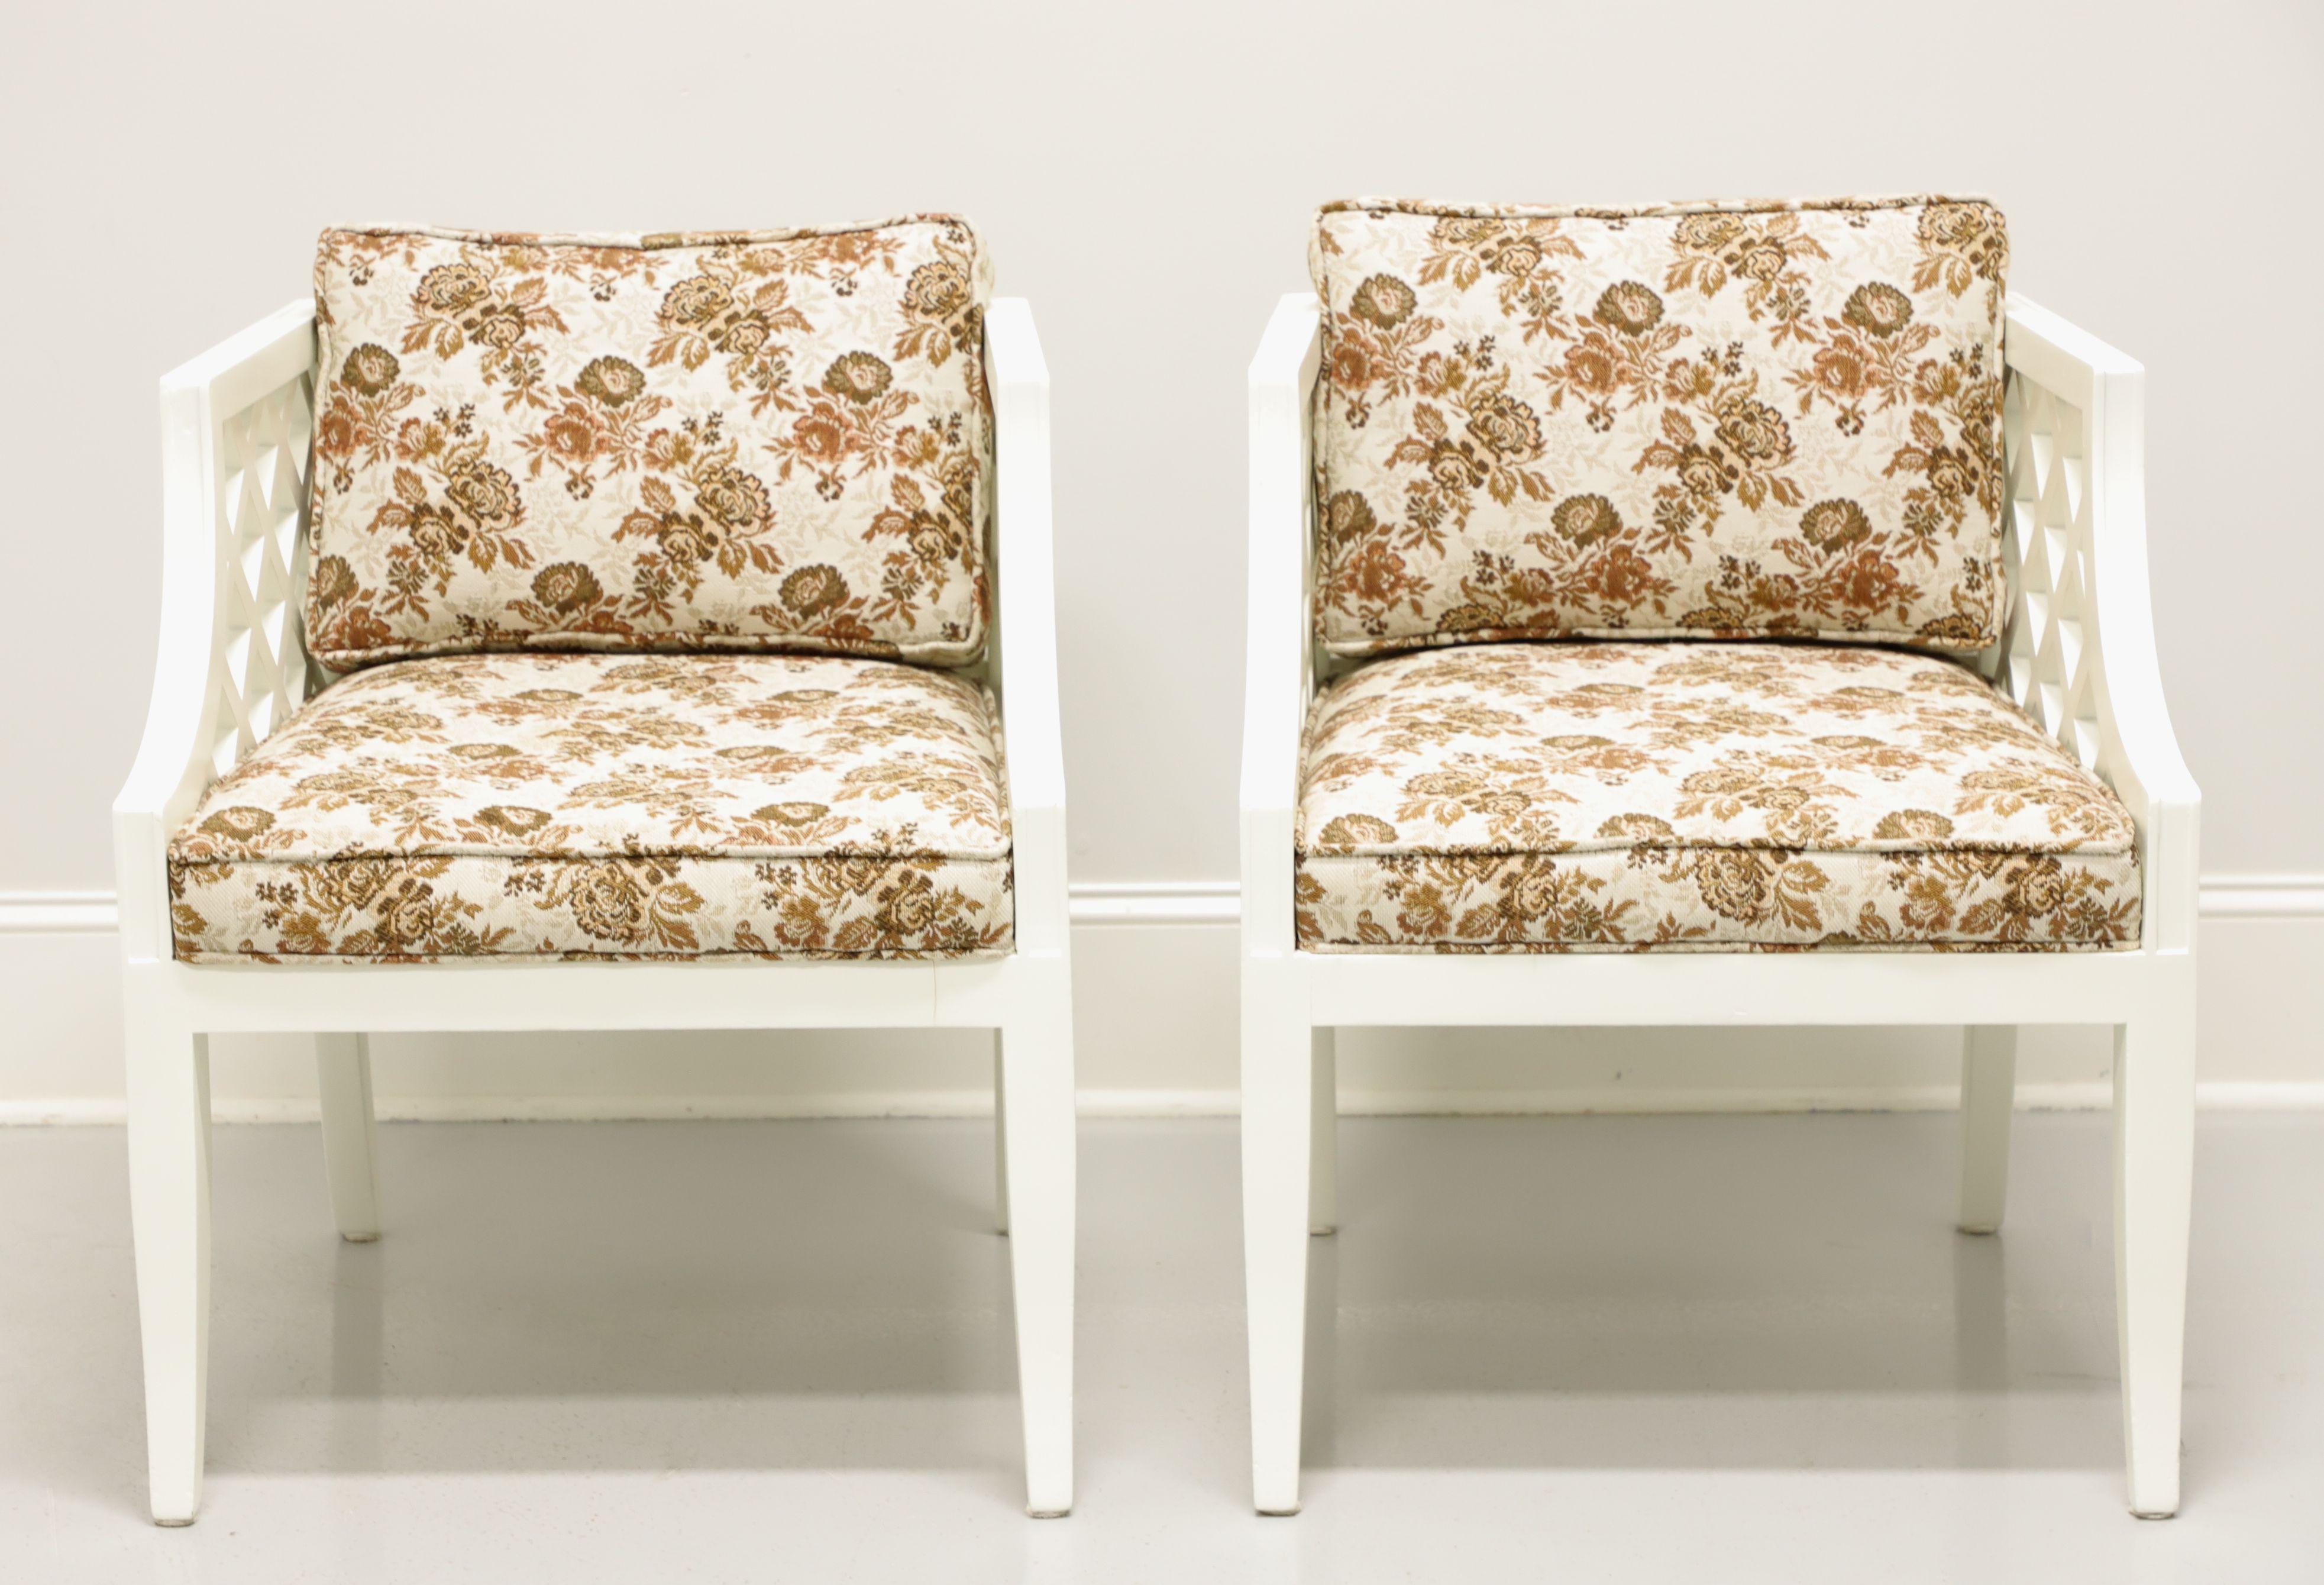 A pair of Mid Century occasional chairs by Marden Manufacturing, of Chicago, Illinois, USA. Solid wood freshly updated with an ivory color paint. Features lattice like sides, ladder backs, an upholstered seat and a back cushion in a brown & white